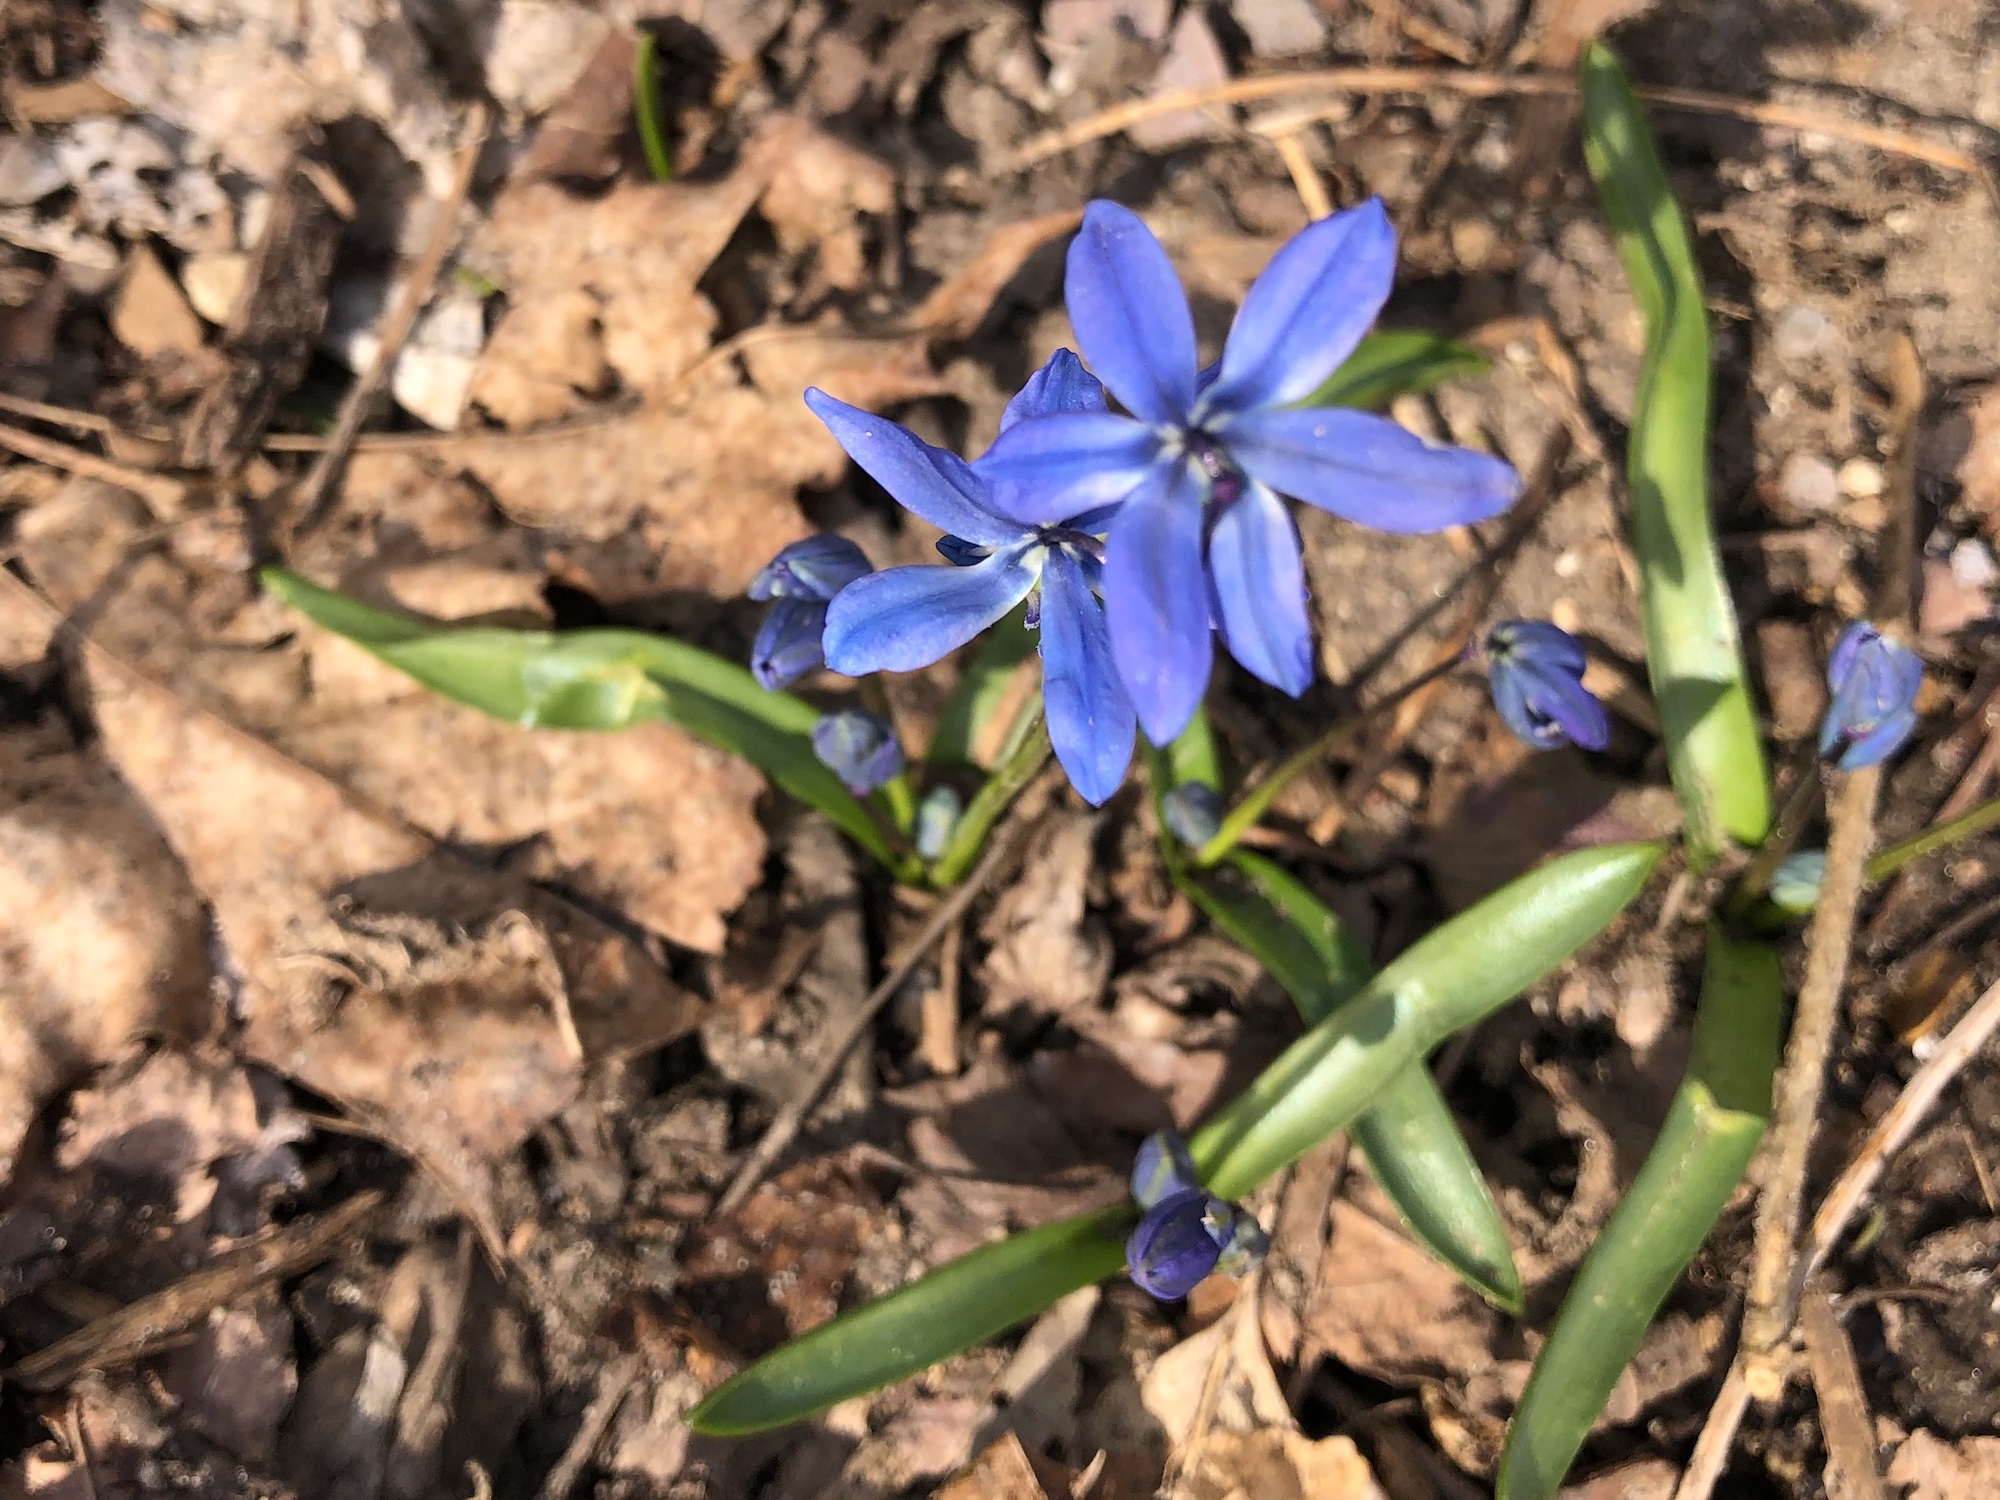 Siberian Squill by Duck Pond in Madison, Wisconsin on April 2, 2020.